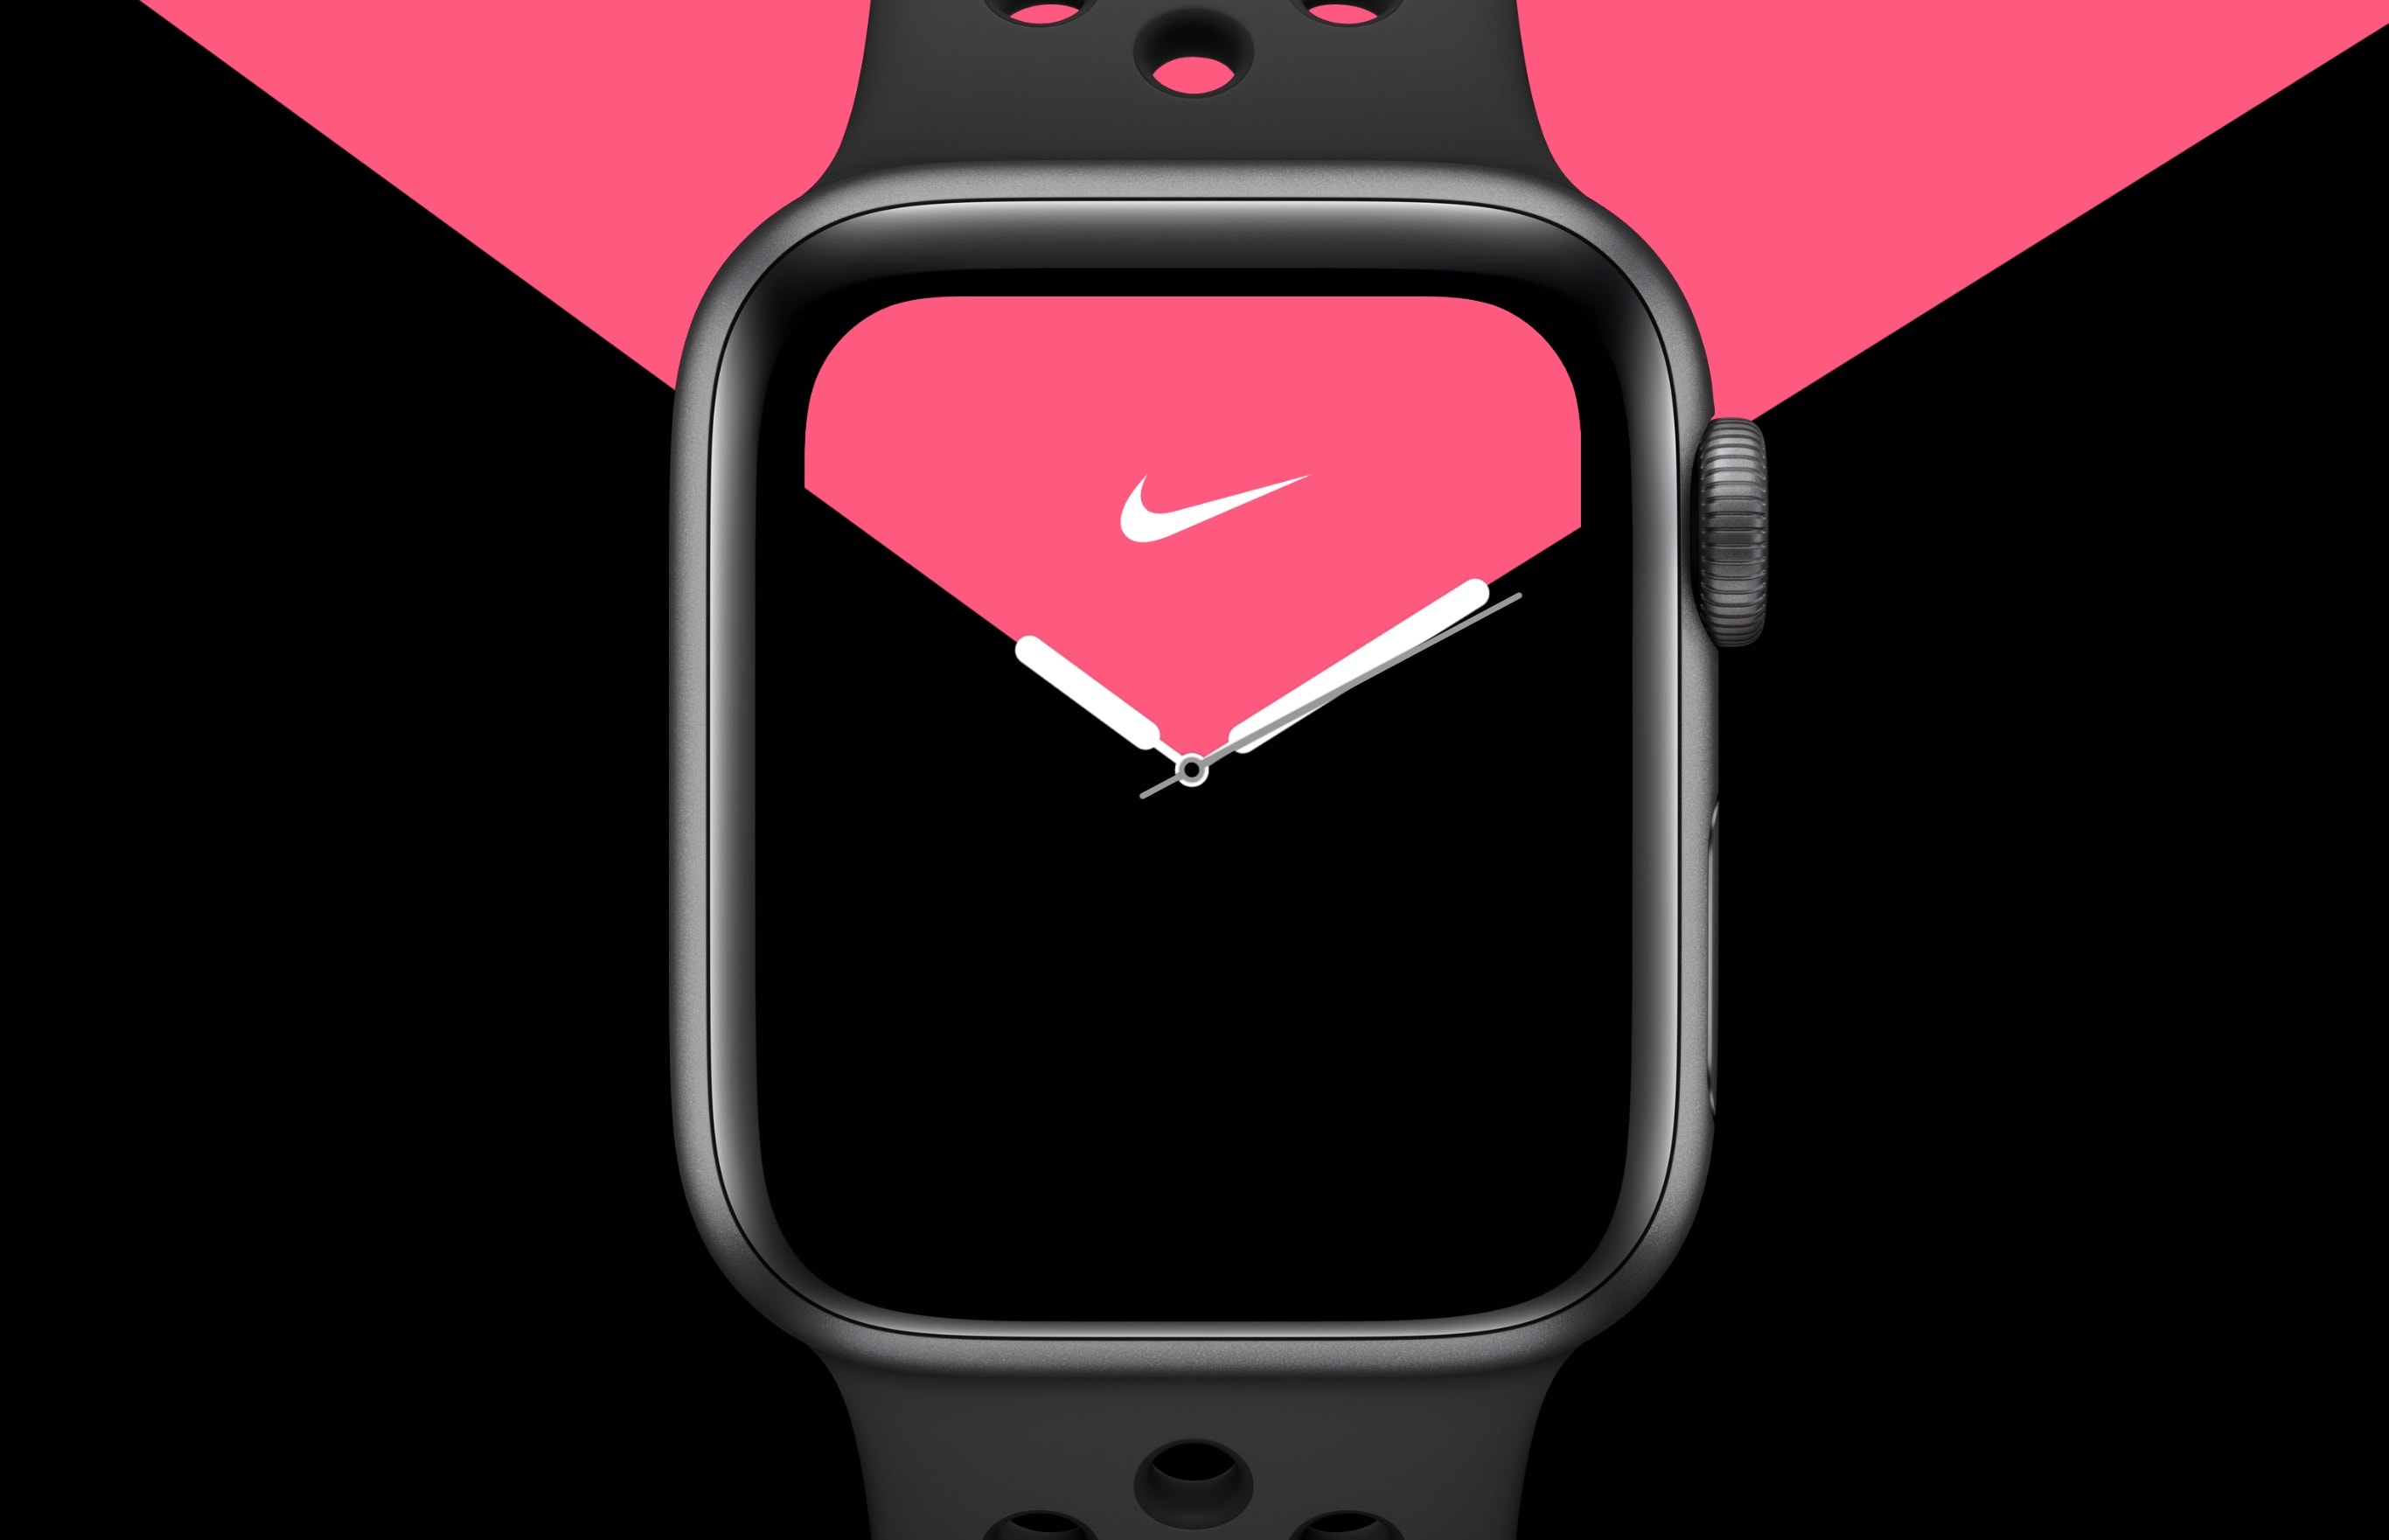 Apple Watch Nike Series 5 available now with lengthy wait | Cult of Mac